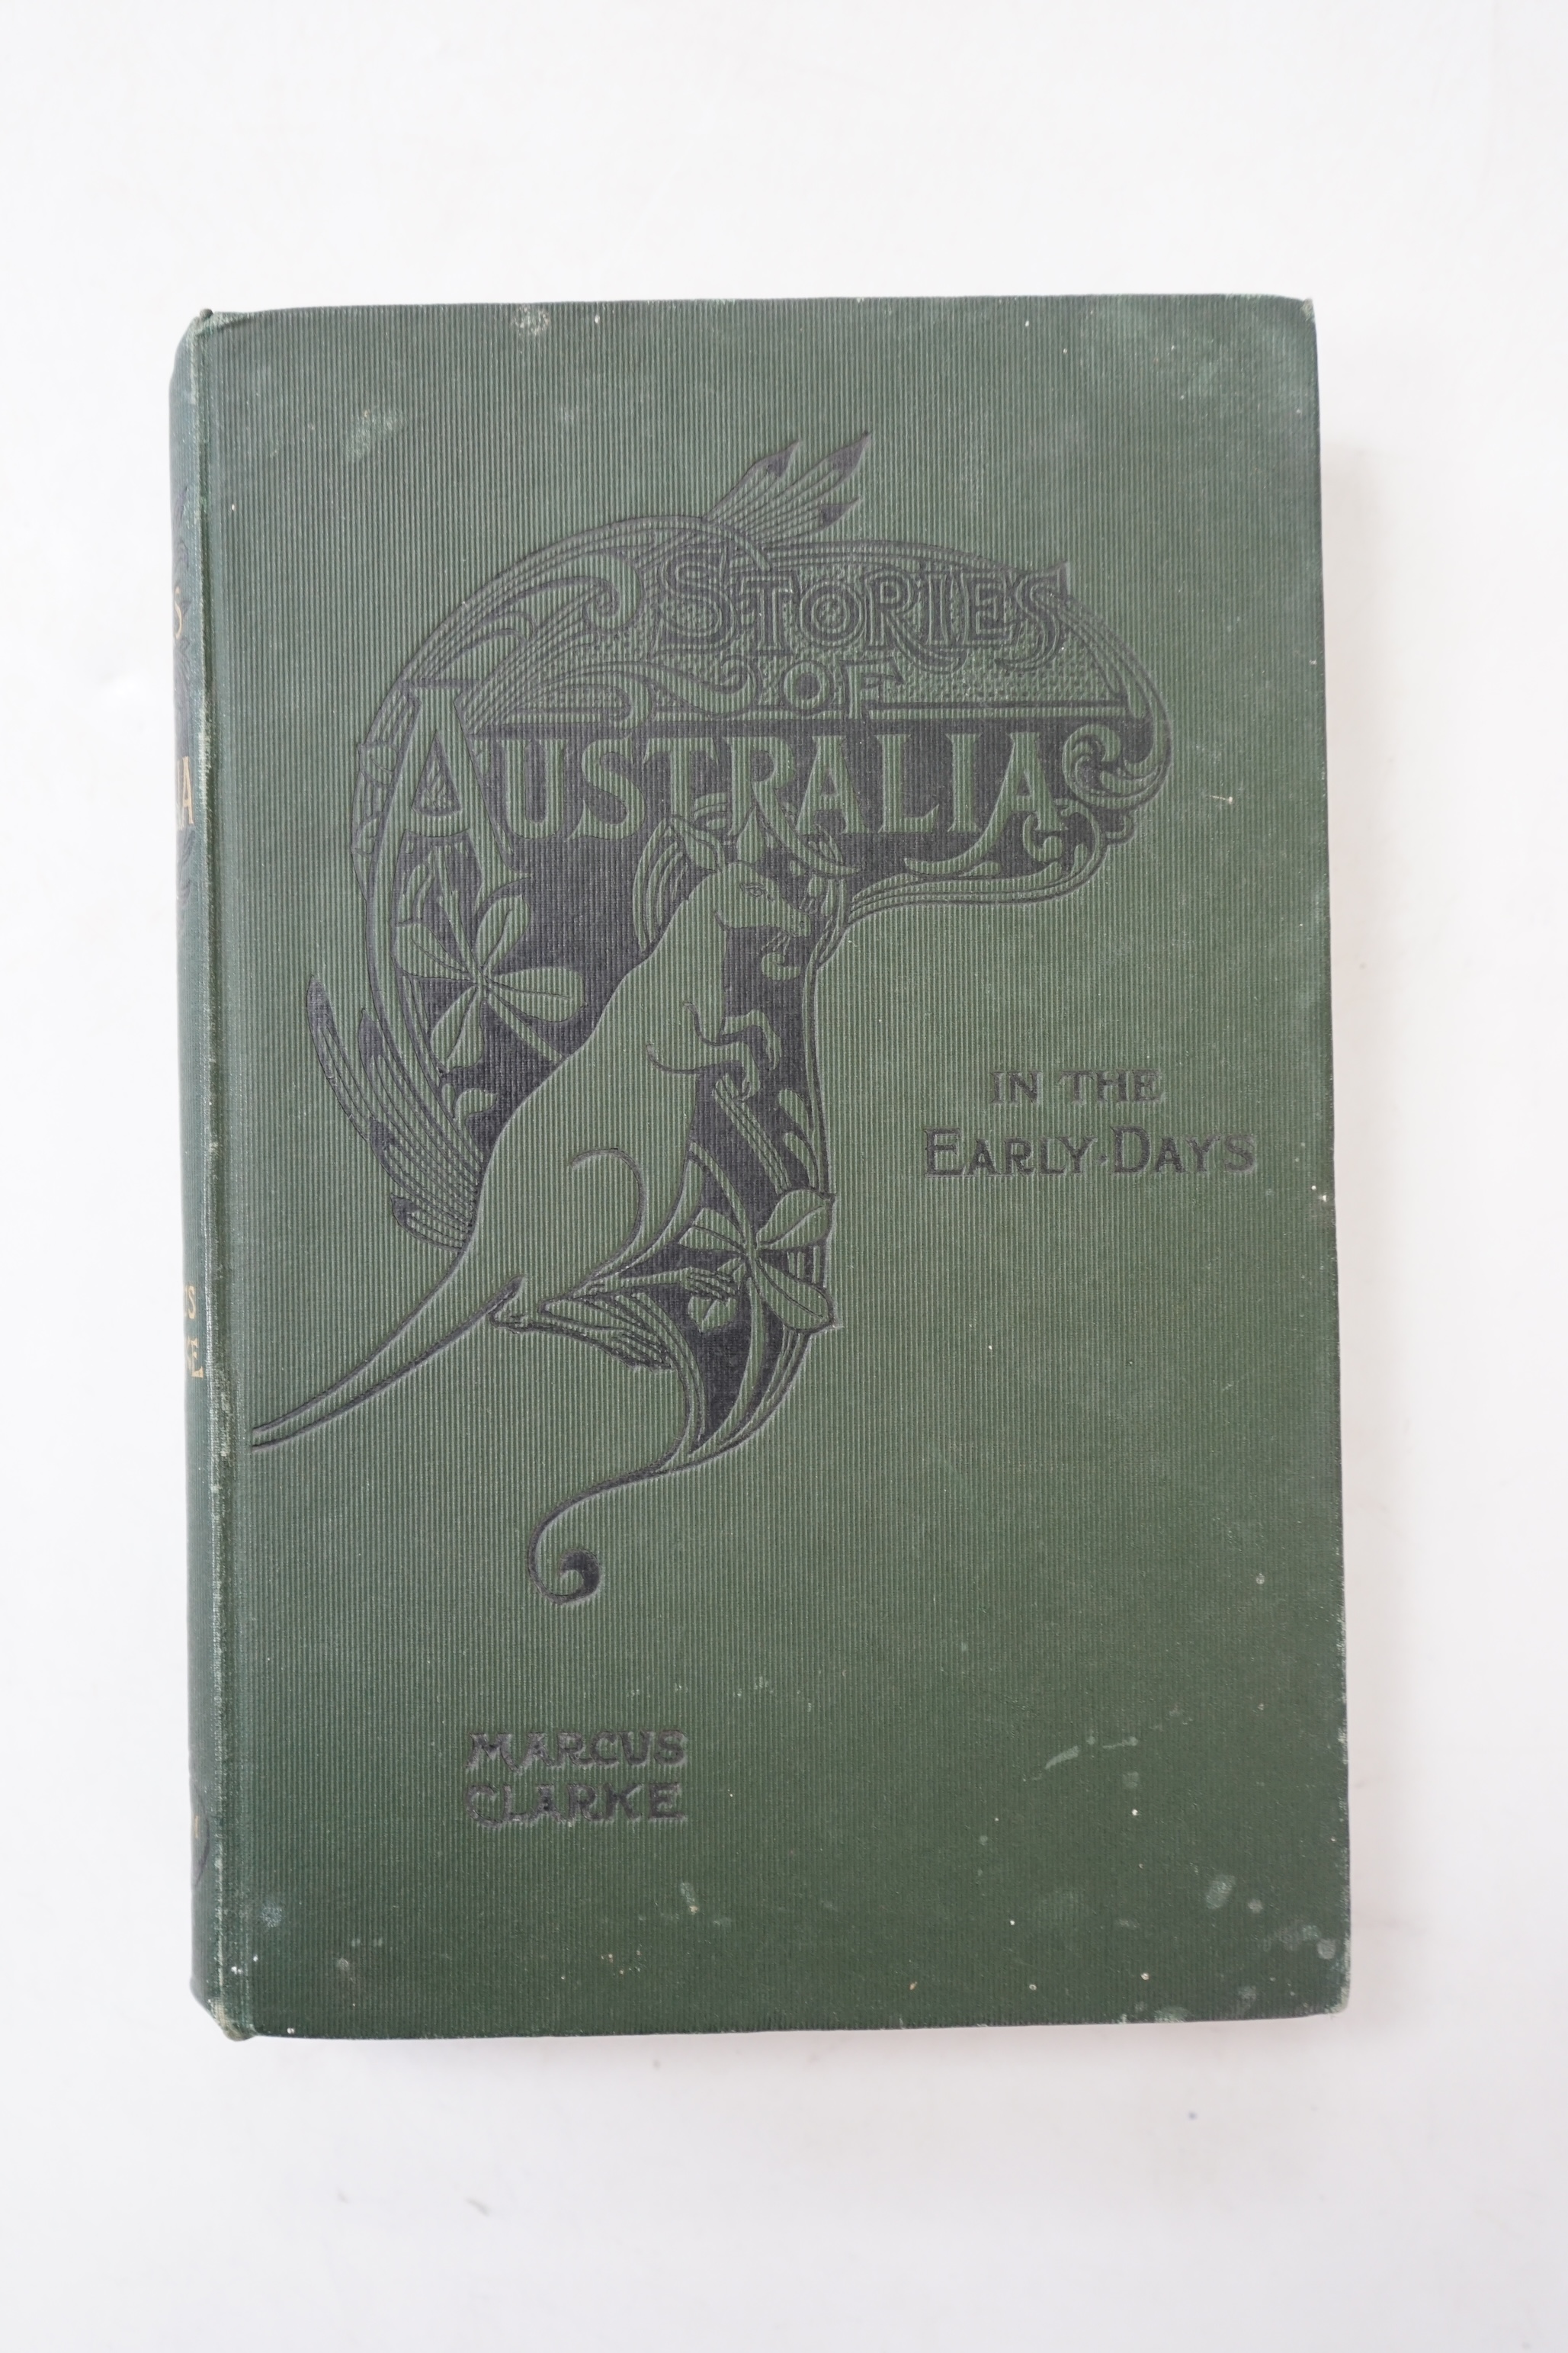 Clarke, Marcus - Stories of Australia in the Early Days. publisher's presentation copy, original blind decorated and gilt lettered cloth. Hutchinson and Co., 1897.